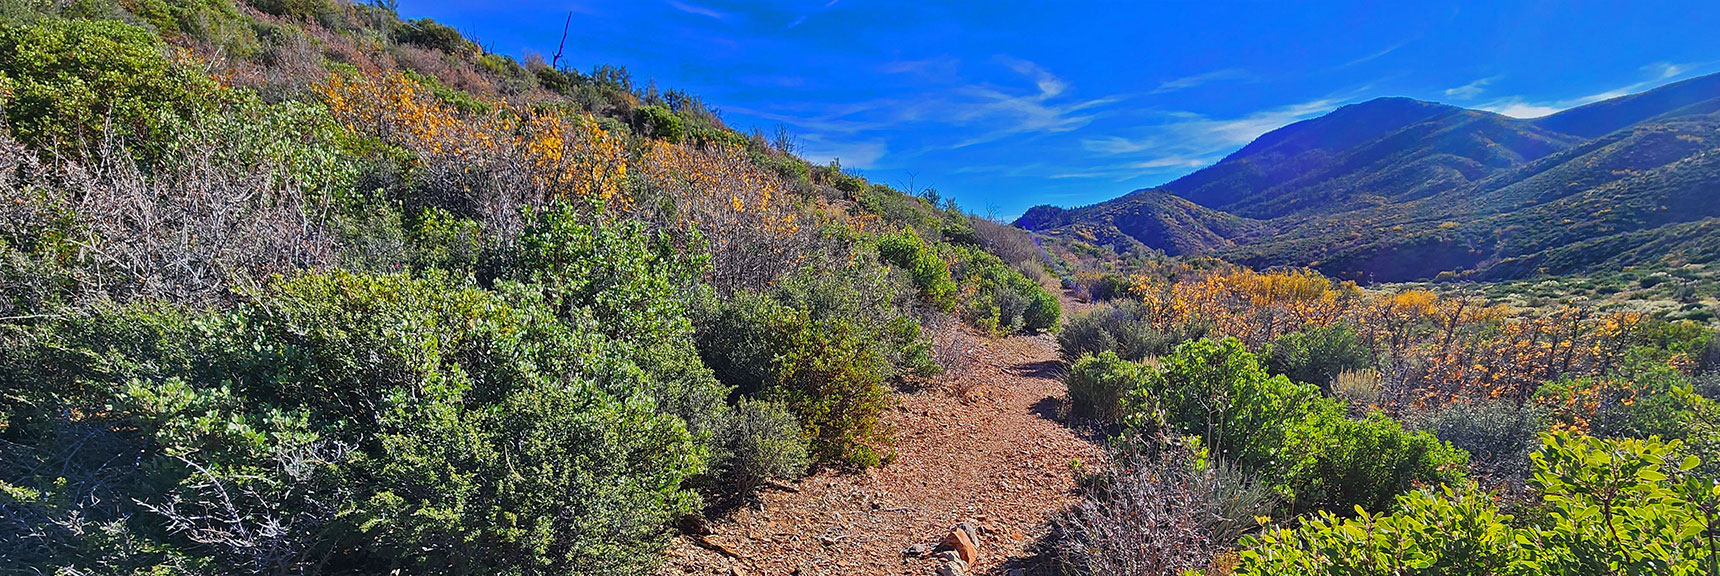 Lower East Loop is Excellent, Well Defined Trail | Griffith Shadow Loop | Lovell Canyon, Nevada